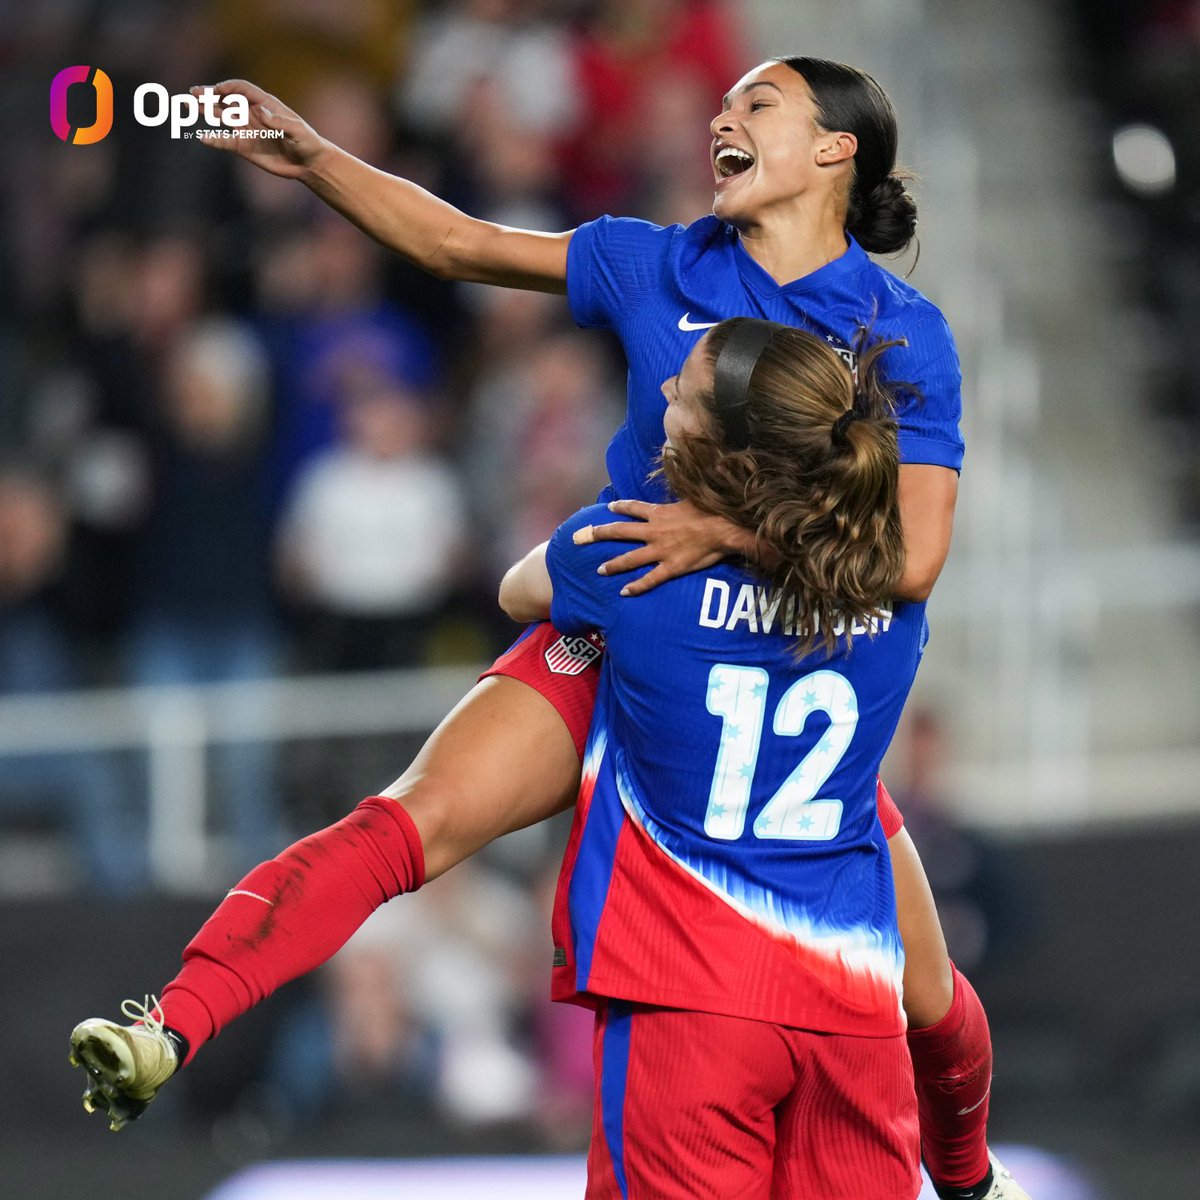 3 - Sophia Smith has scored three goals from outside the box for the #USWNT, all since 2022, more than any other player on the team in that time. Distance.